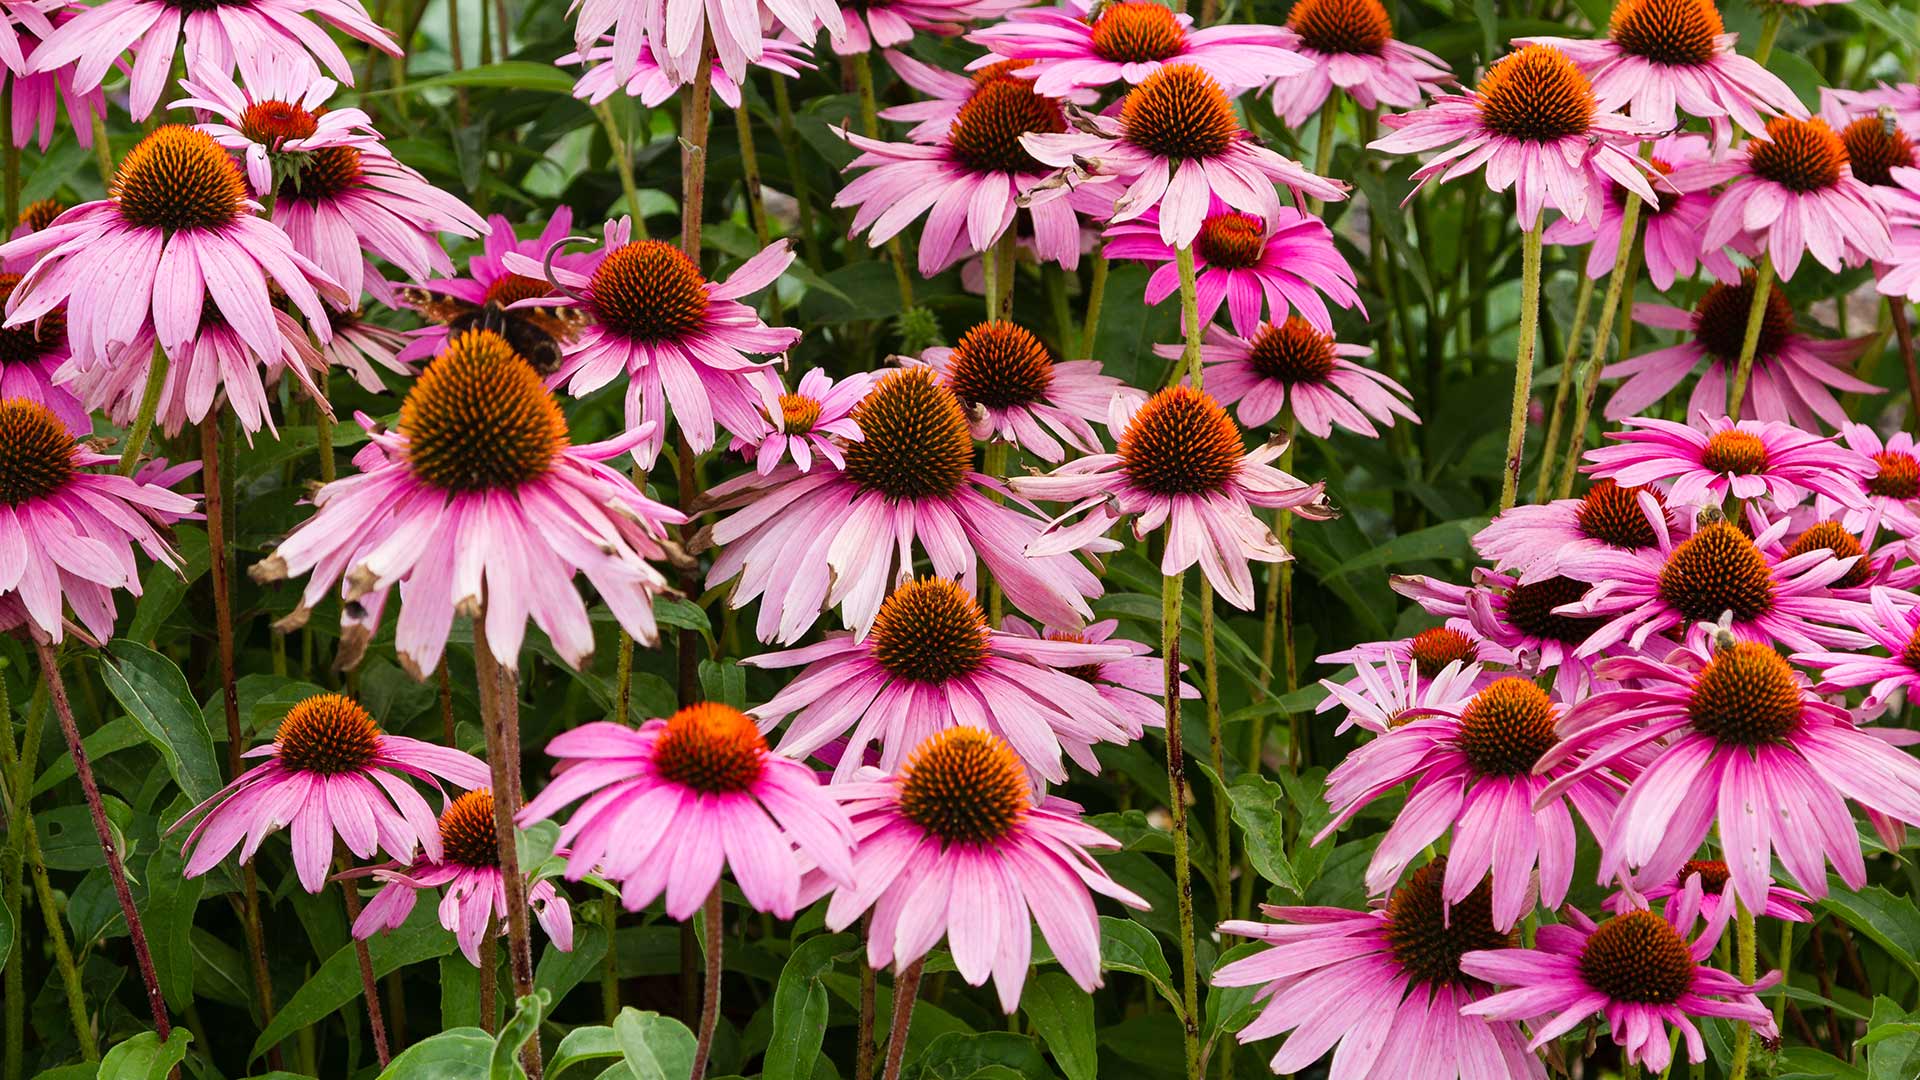 5 Amazing Summer Blooms You'll Find in Michigan